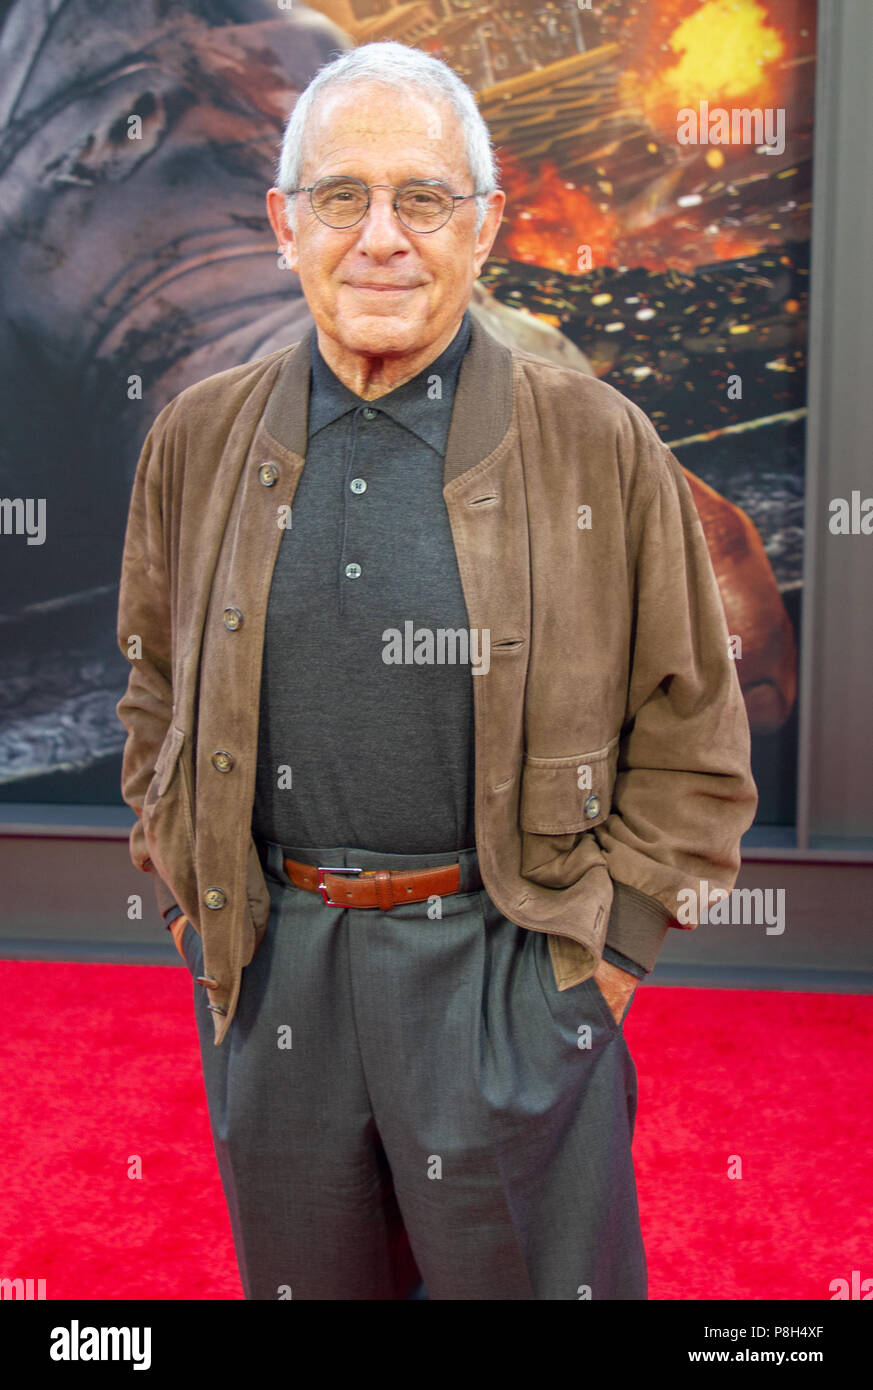 New York, USA. 10th July, 2018. NBCUniversal vice chairman Ron Meyer attends the New York premiere of “Skyscraper” on July 10, 2018. Credit: Jeremy Burke/Alamy Live News Stock Photo